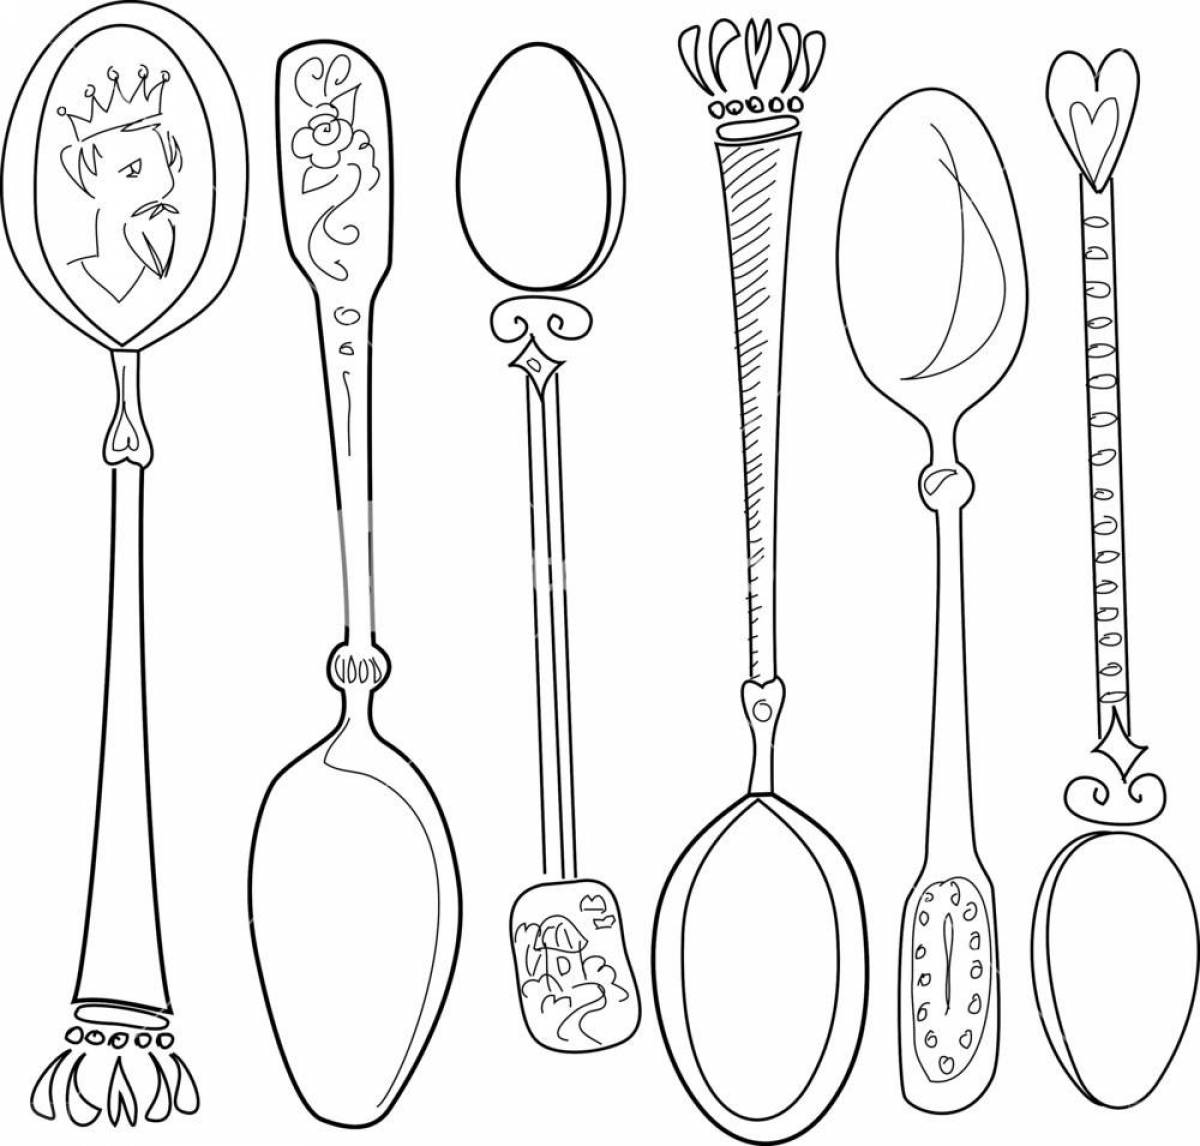 Luminous wooden spoon coloring page